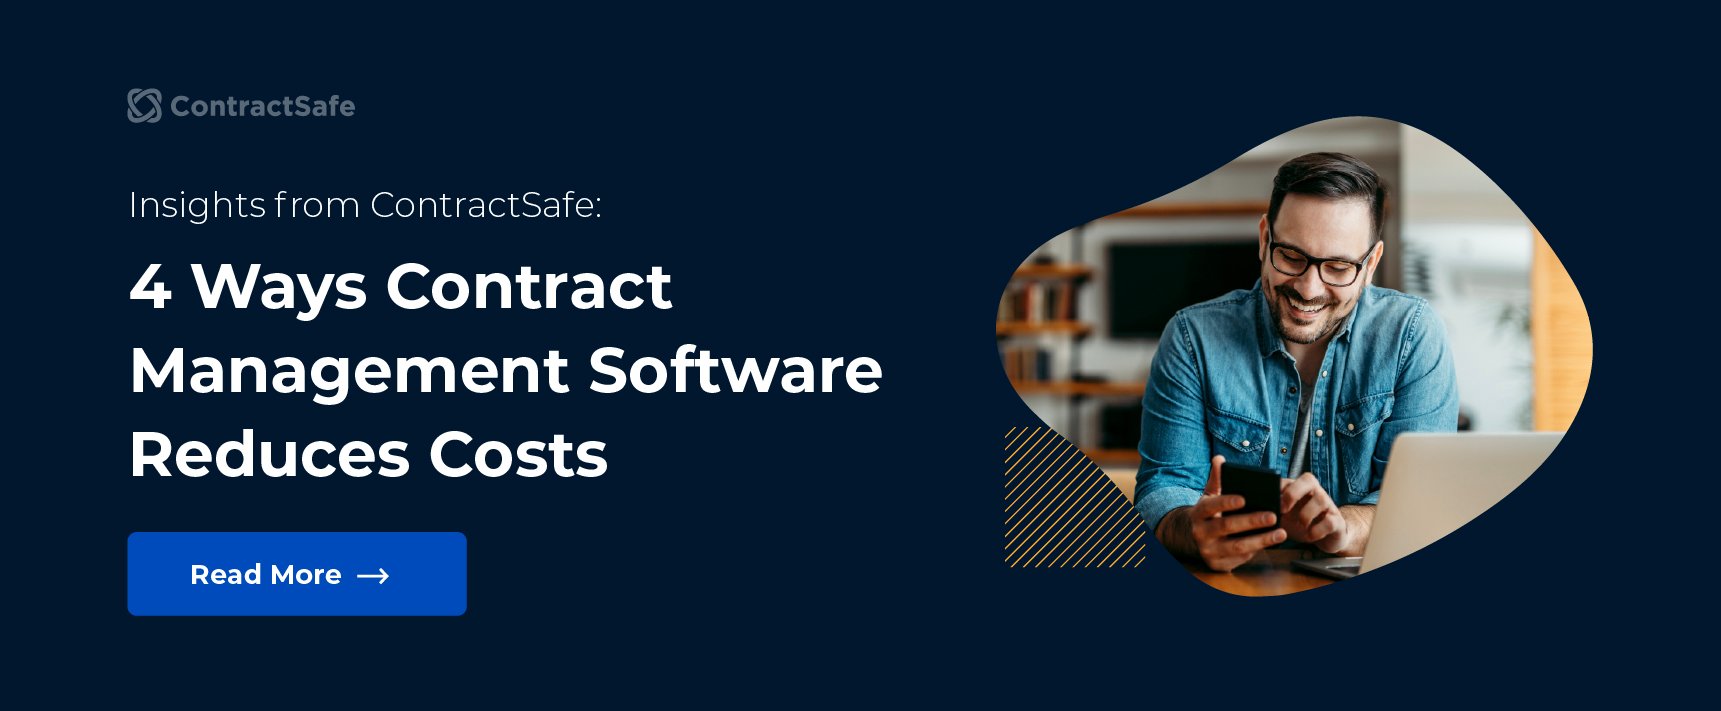 Insights from ContractSafe: 4 Ways Contract Management Software Reduces Costs